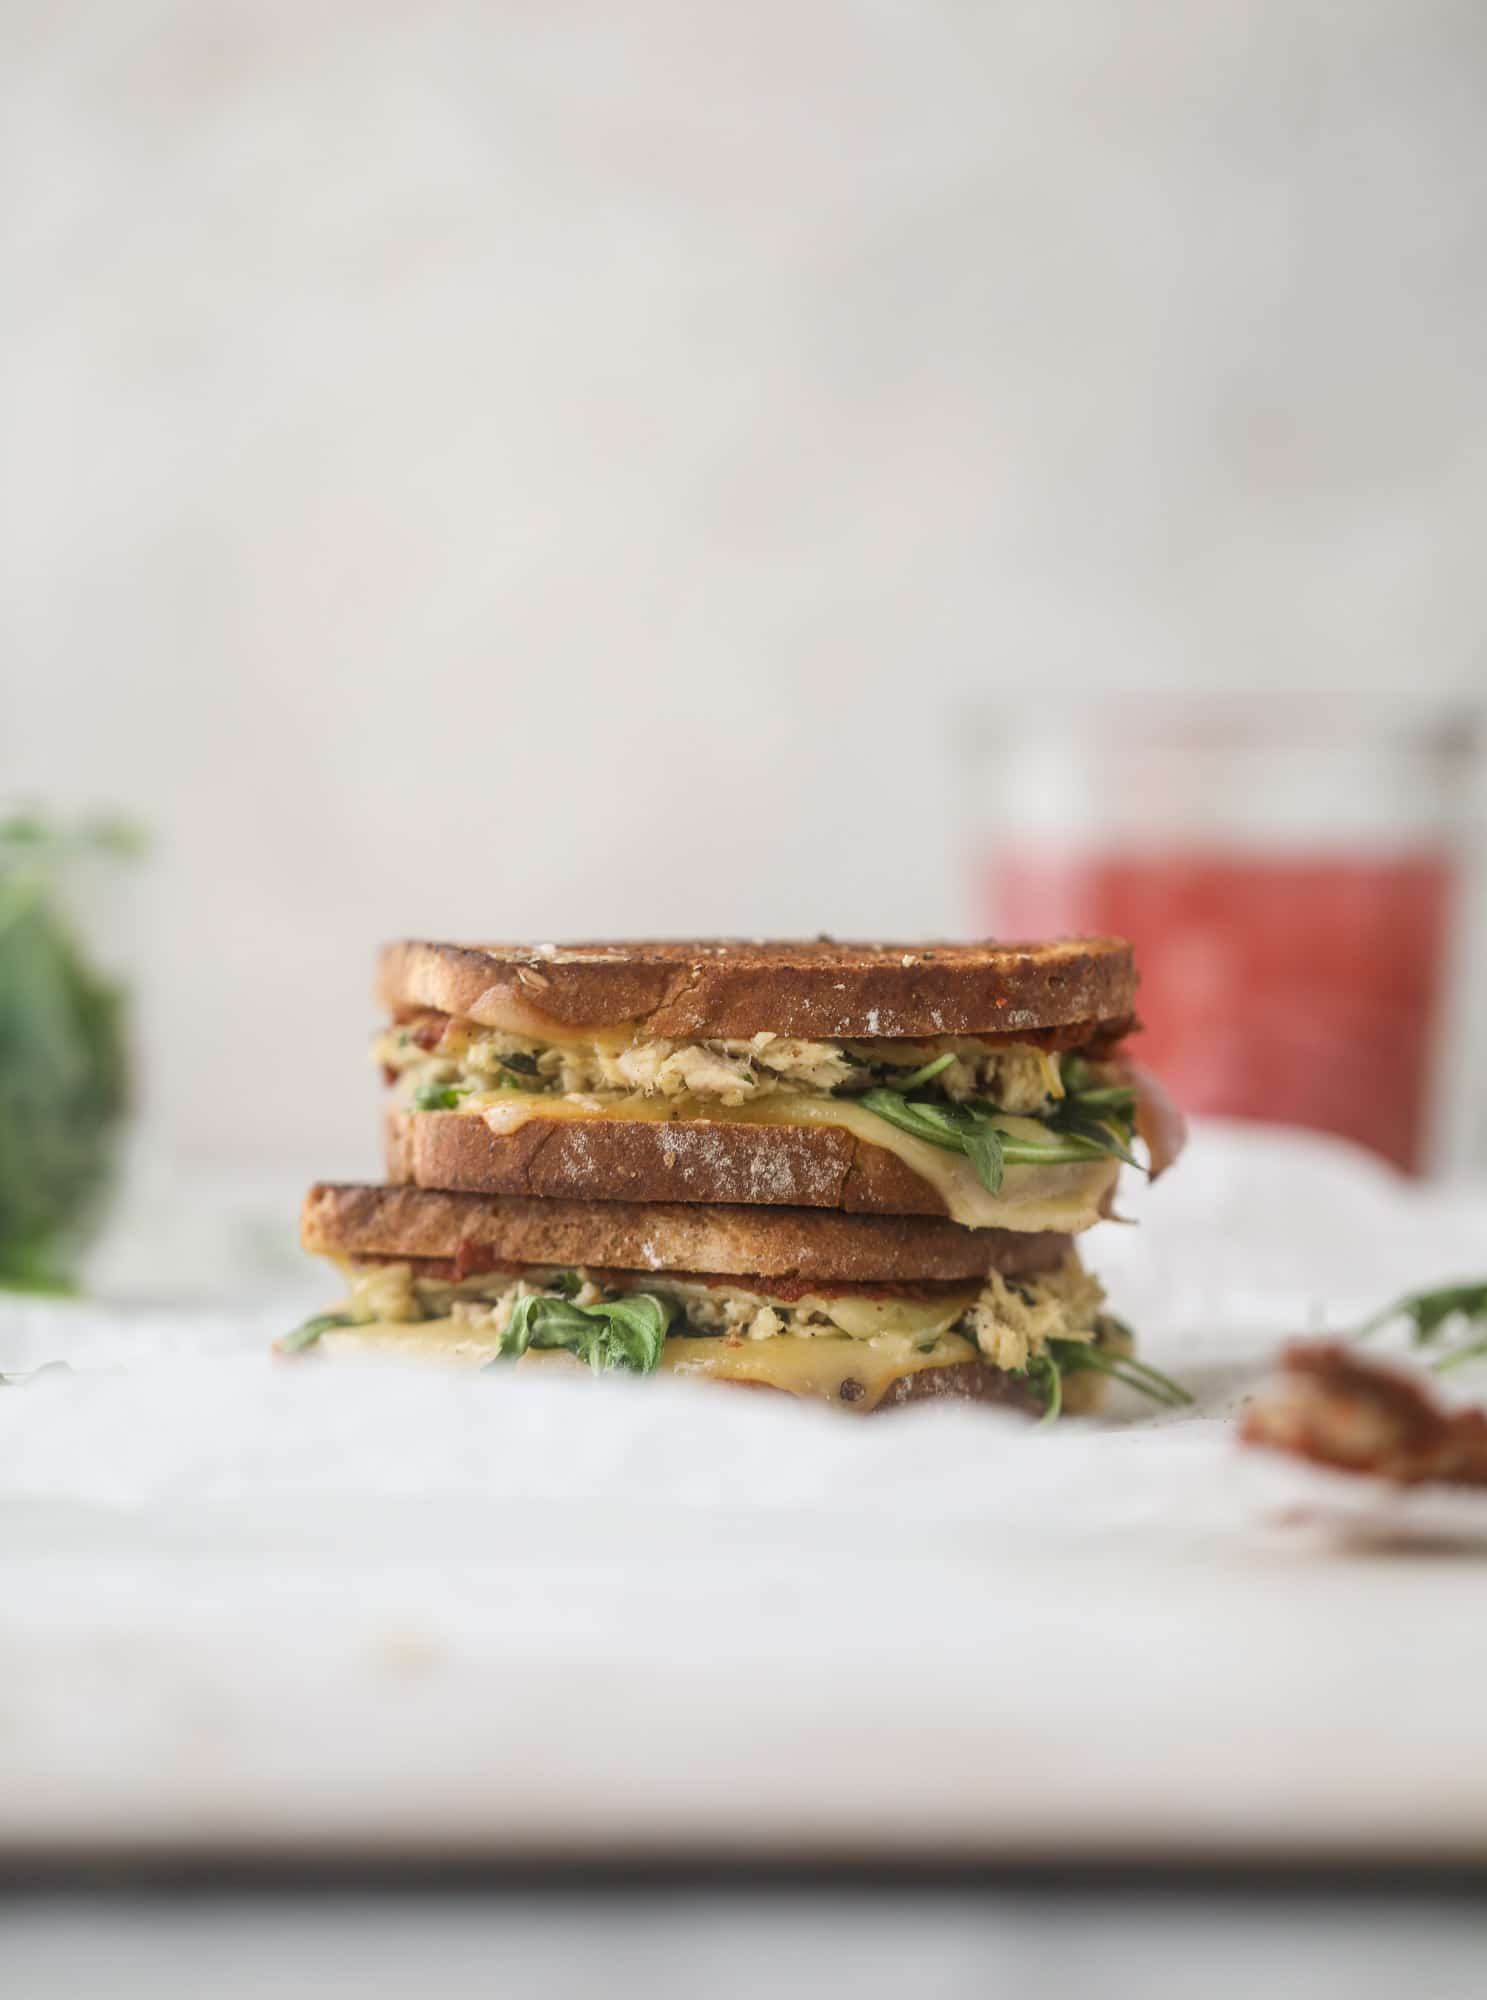 This tuscan tuna melt is a modern way to enjoy a tuna sandwich, with peppery arugula, melty cheese, pickled onions and sun dried tomato spread! I howsweeteats.com #tuna #melt